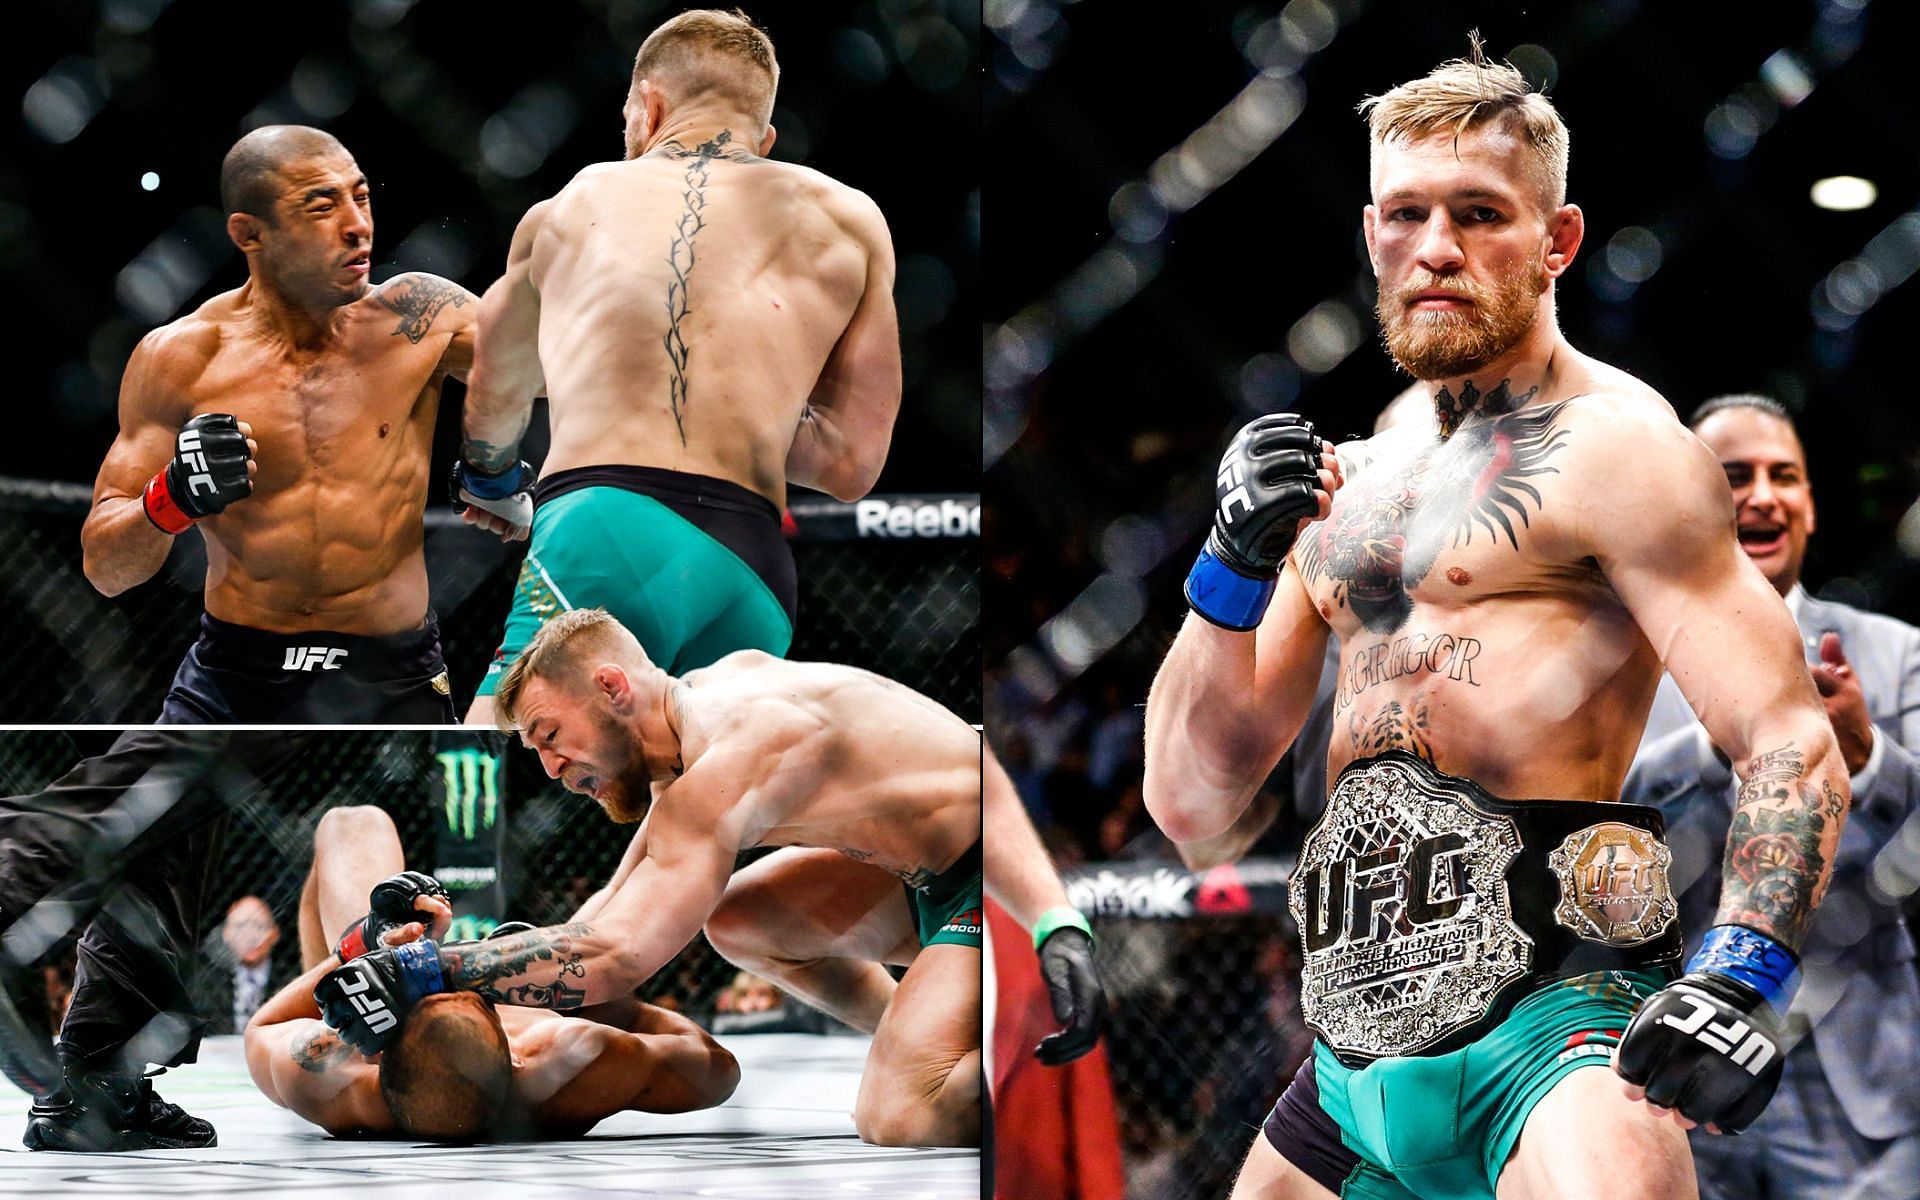 Conor McGregor knocking out Jose Aldo at UFC 194 [Images courtesy: @MMAFighting (Twitter)]